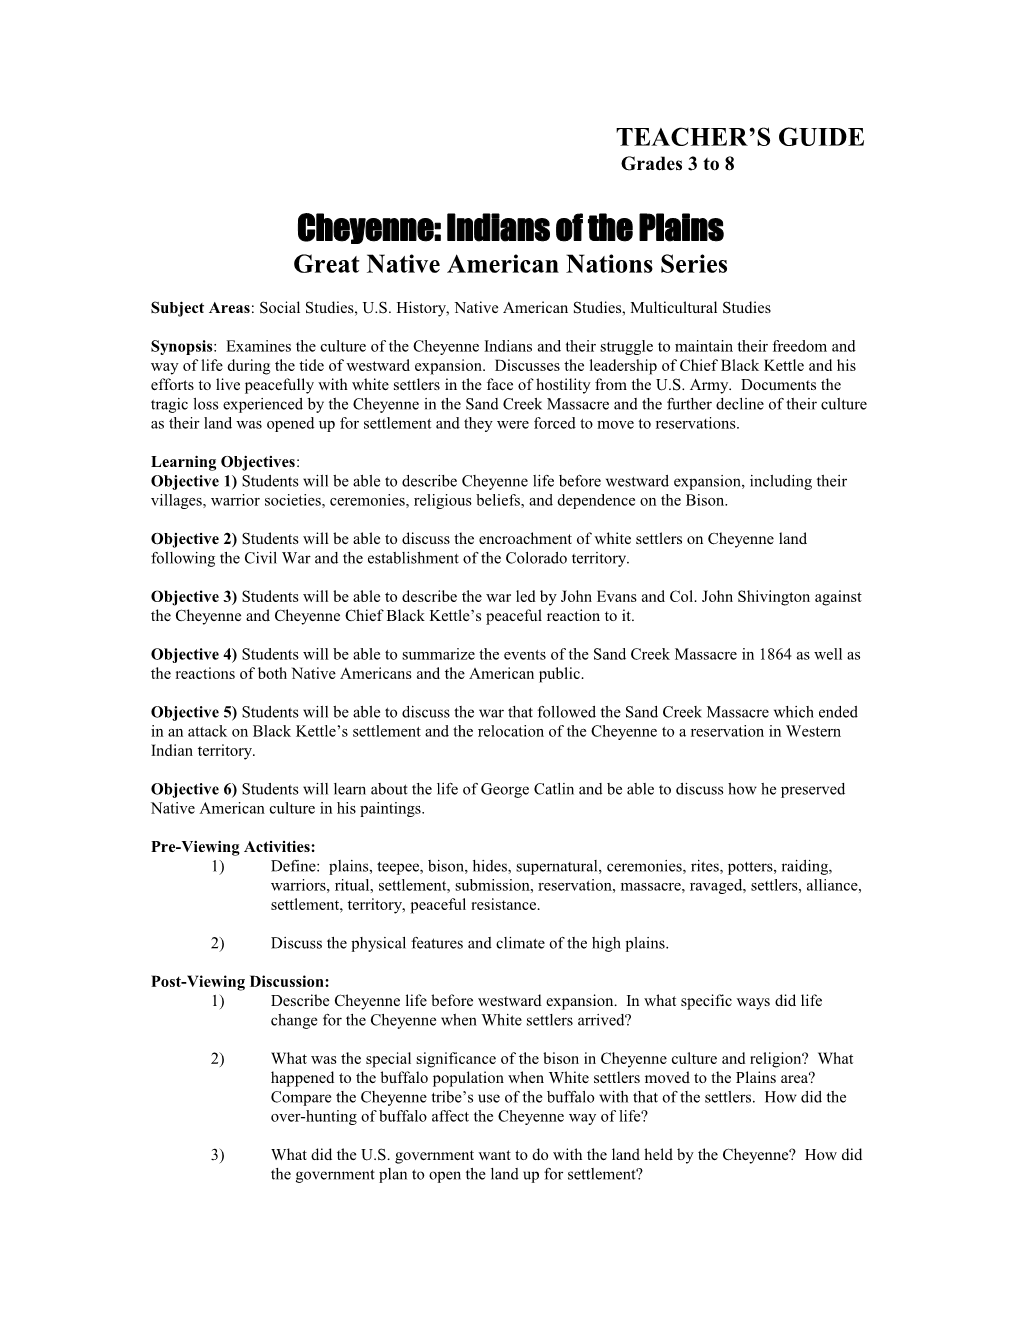 Cheyenne: Indians of the Plains